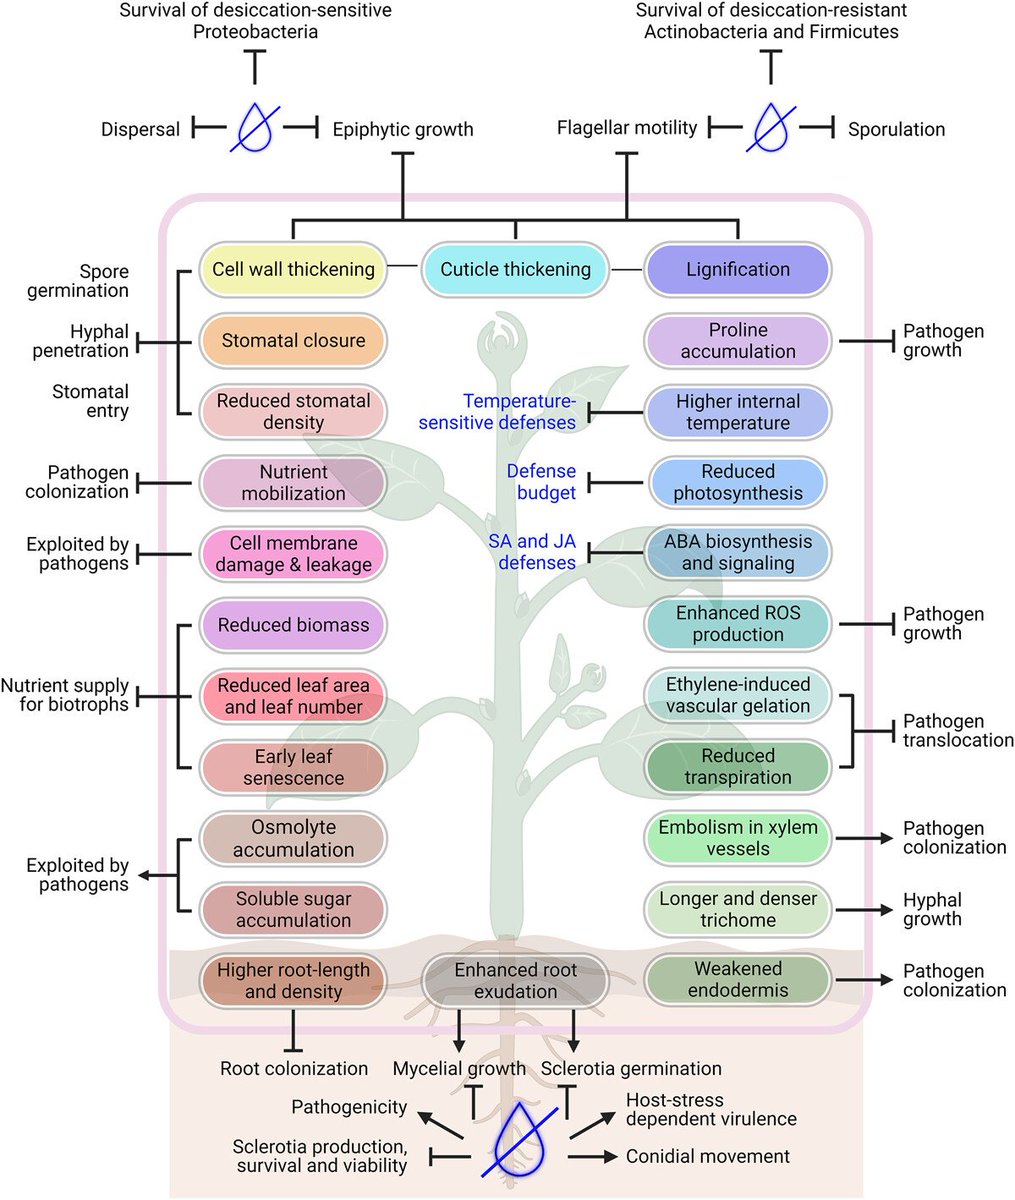 Review by @Aaanchal_12 et al. @NIPGRsocial @SCIPdatabase @PlantCellEnvir @wileyplantsci #Drought: A context‐dependent damper and aggravatorof plant #diseases onlinelibrary.wiley.com/doi/10.1111/pc… #PlantSci @plant_disease @IndianBotanists @VoicesofIndAcad @FoodAdvance1 @BISA__India @Sdg13Un